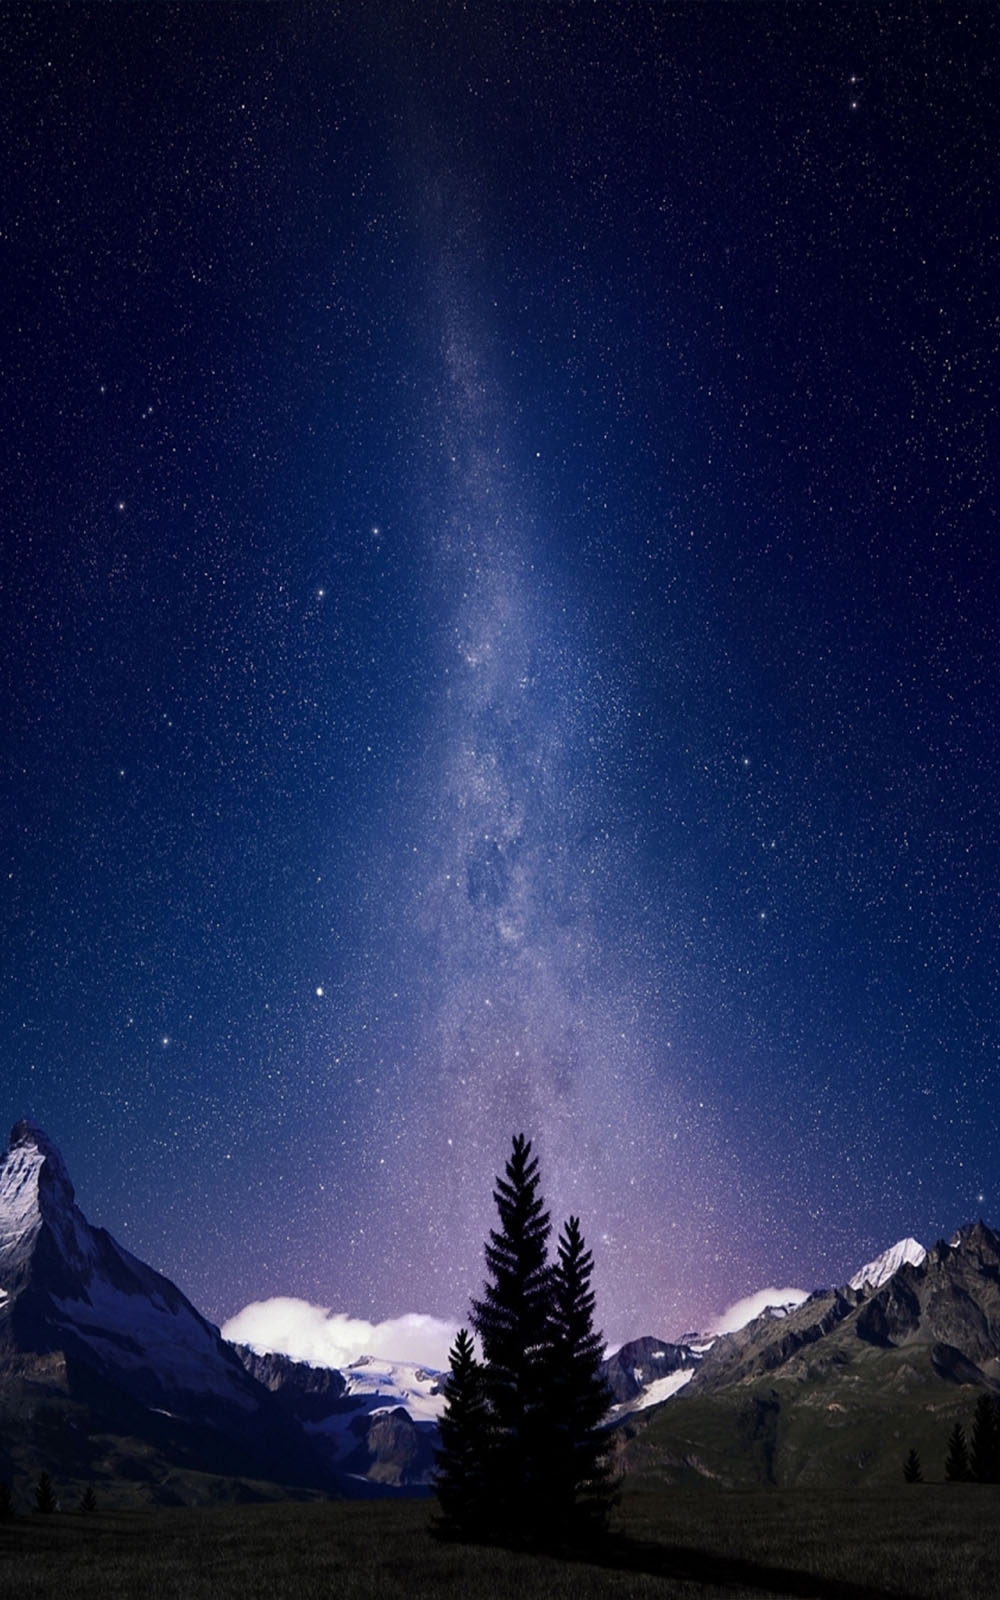 night wallpaper hd for mobile,sky,nature,night,atmosphere,mountain